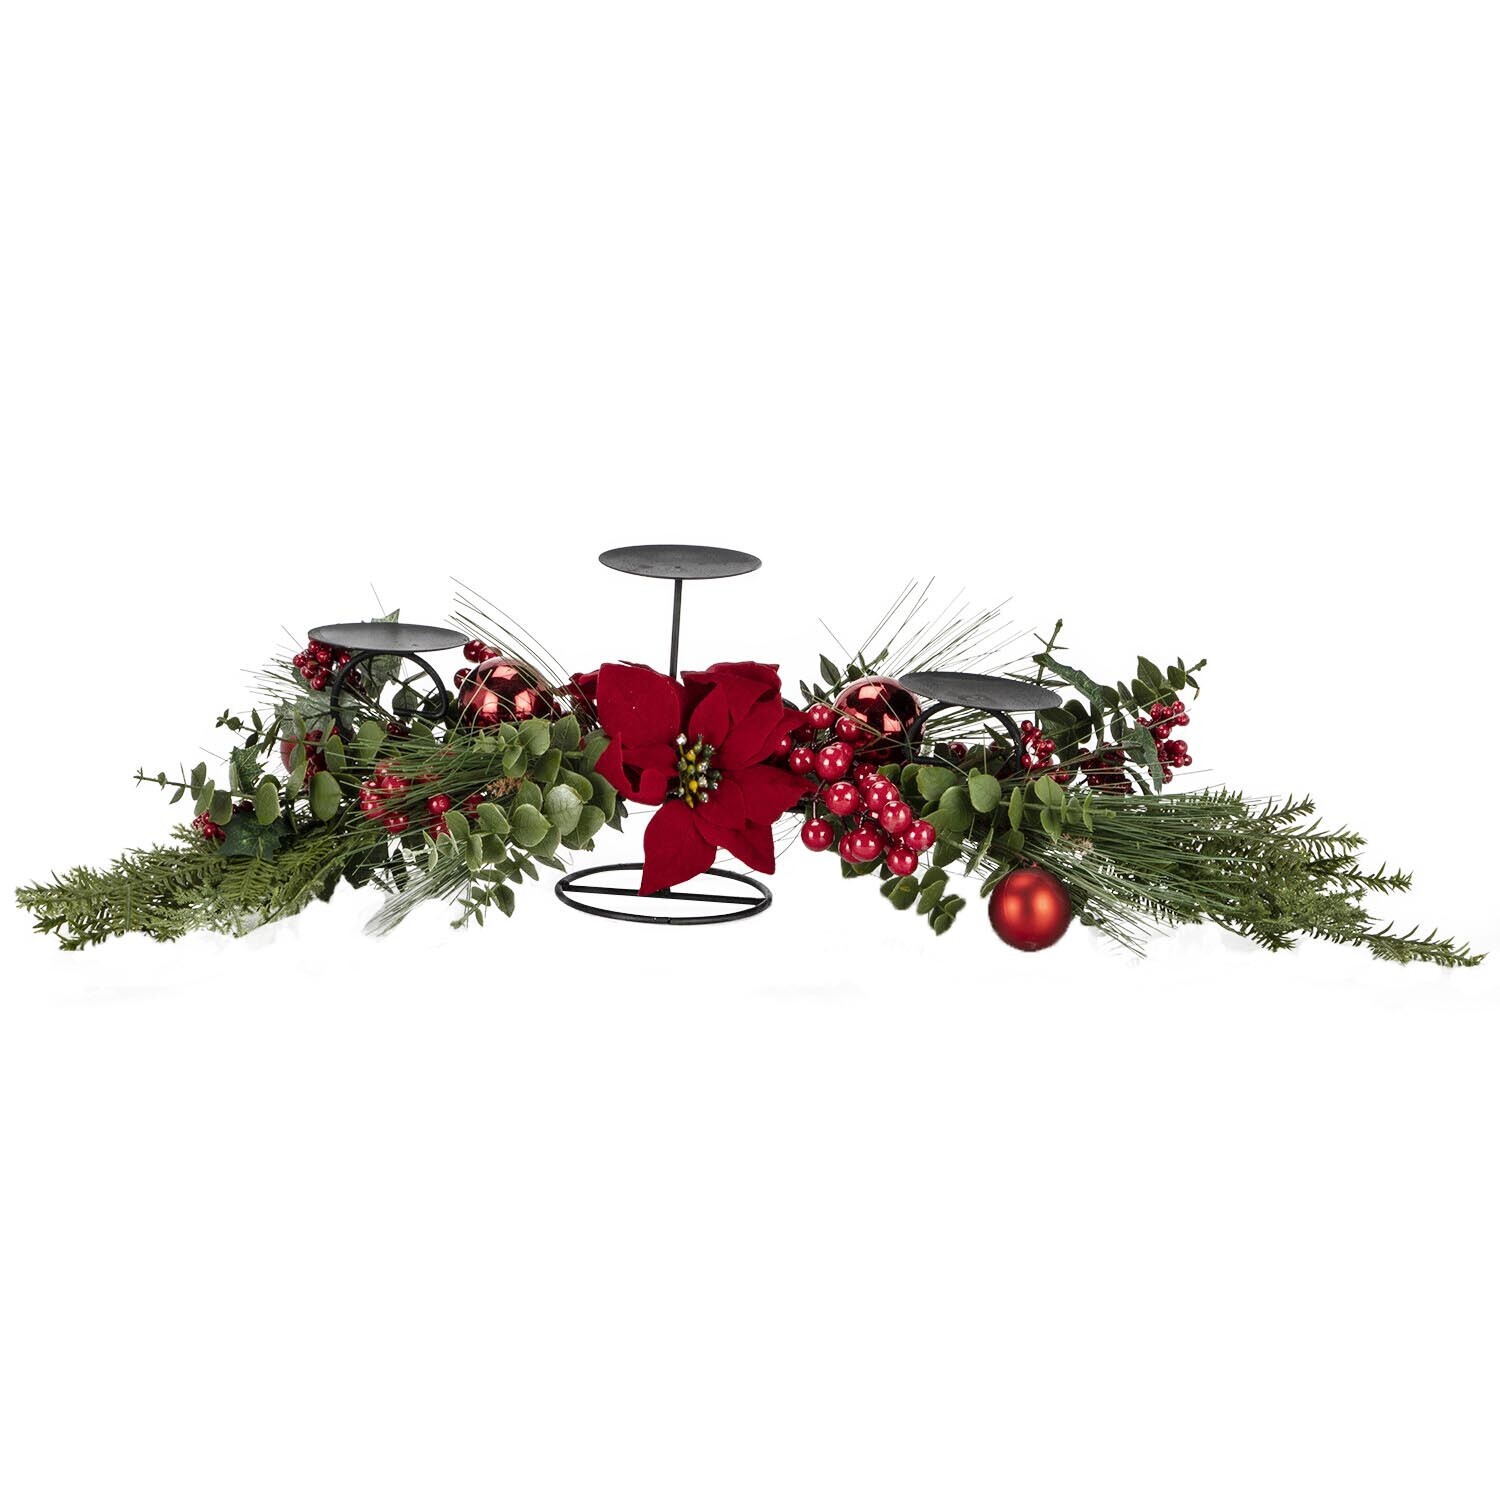 Red Poinsettia Candle Holder Decoration Image